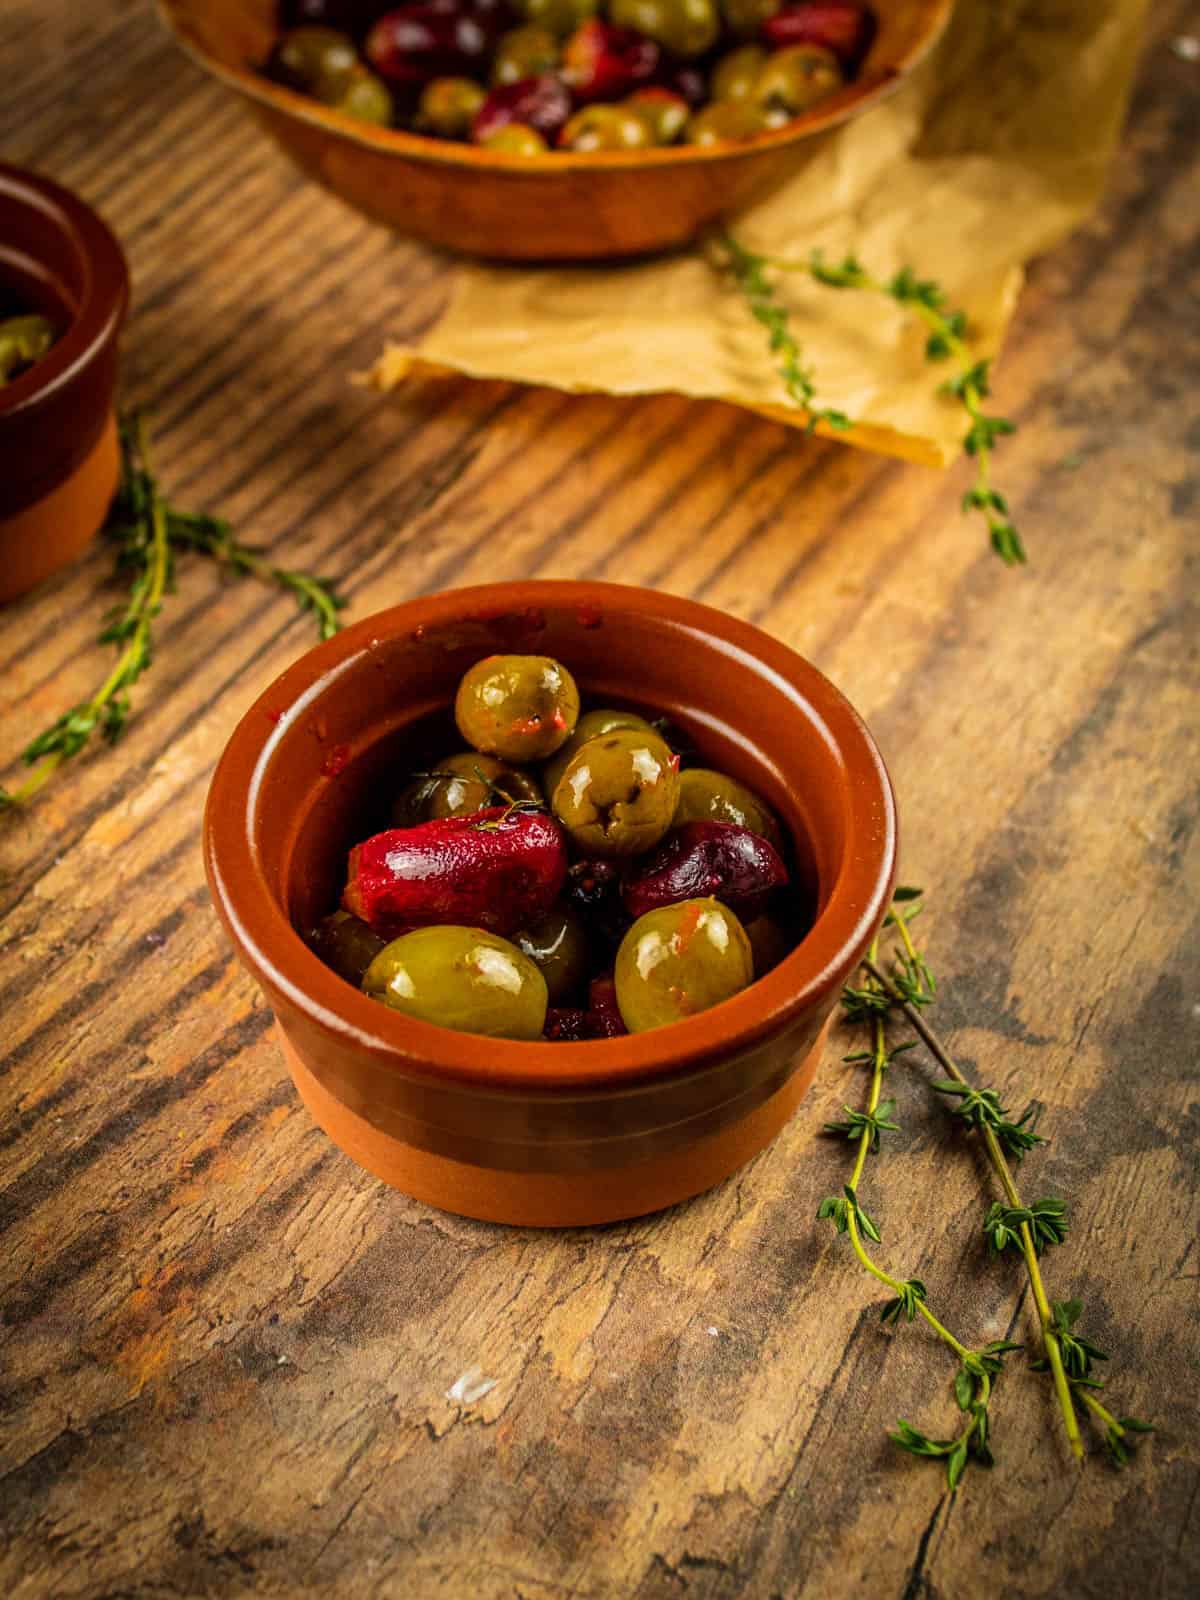 brown ceramic dish of roasted olives and grapes with a thyme sprig